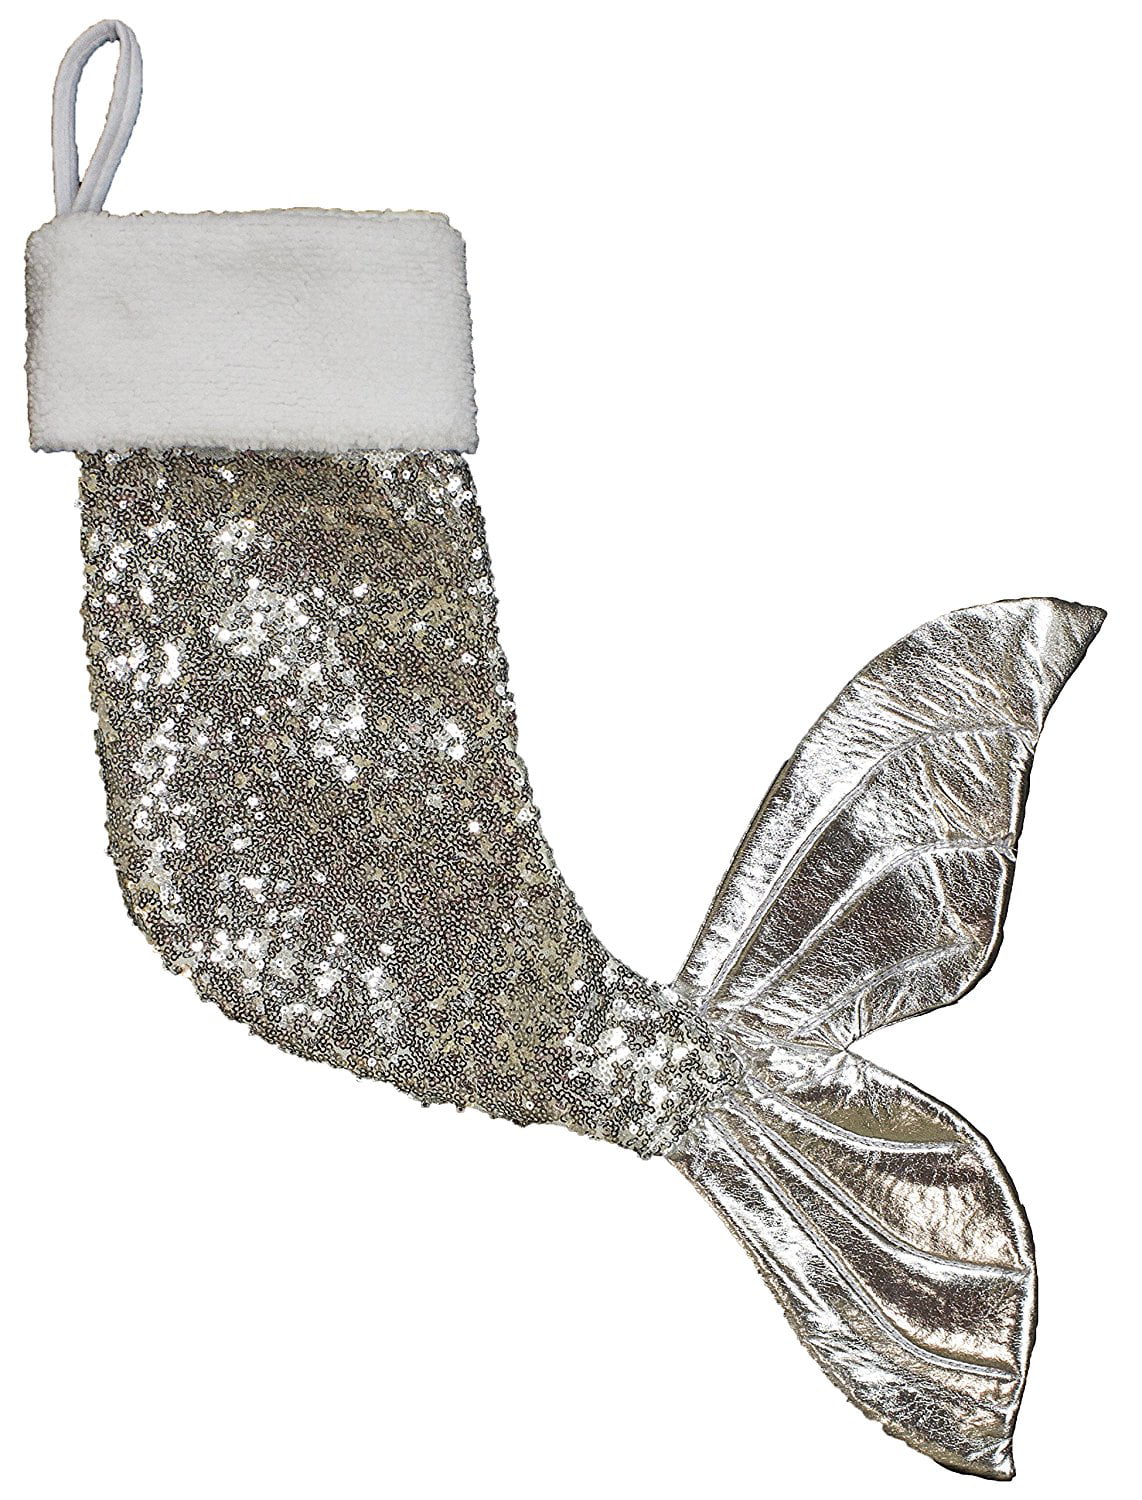 Magical Sequined Mermaid Tail Christmas Stocking In Rainbow And Silver! 